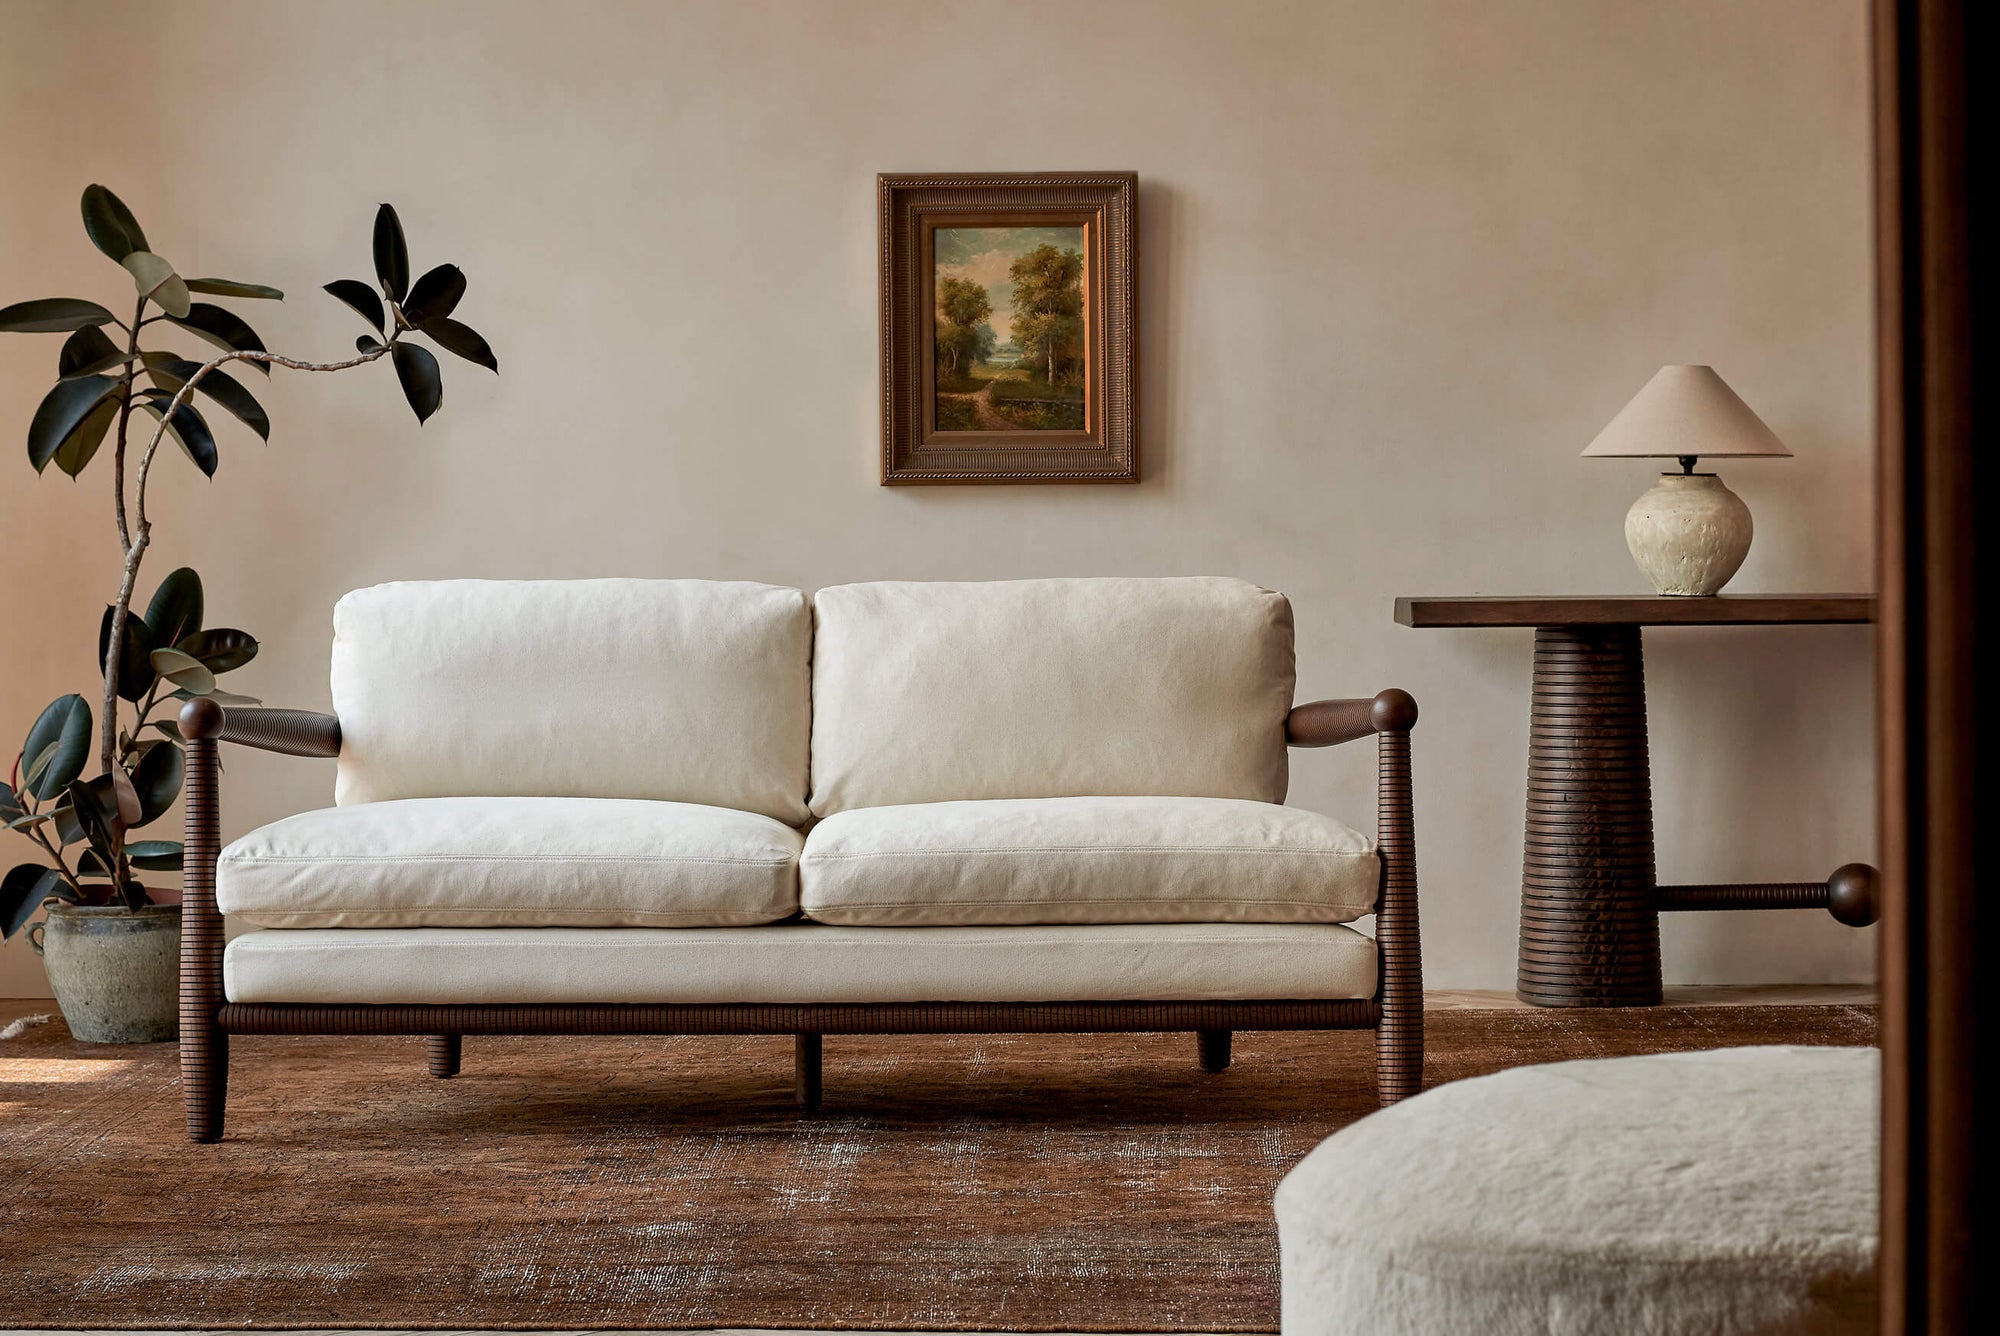 Gio 72" Sofa in a Dusky Ash wood frame with Cotton Canvas Beach Walk slipcover, placed in a room with the Zenia Console Table